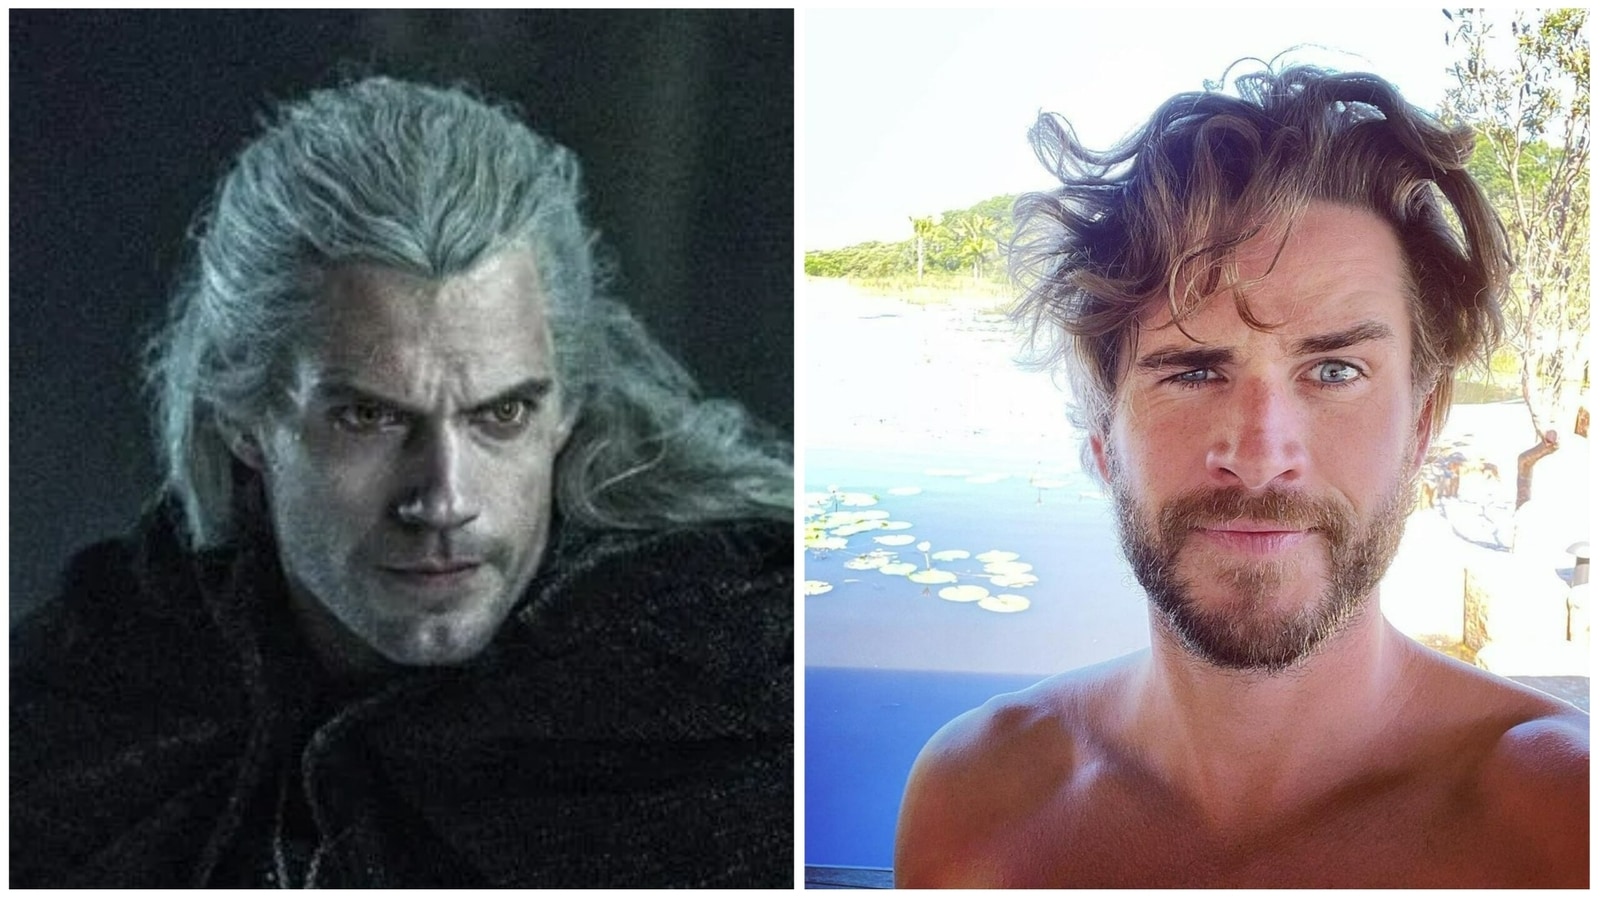 The Witcher: Henry Cavill makes way for Liam Hemsworth in season 4